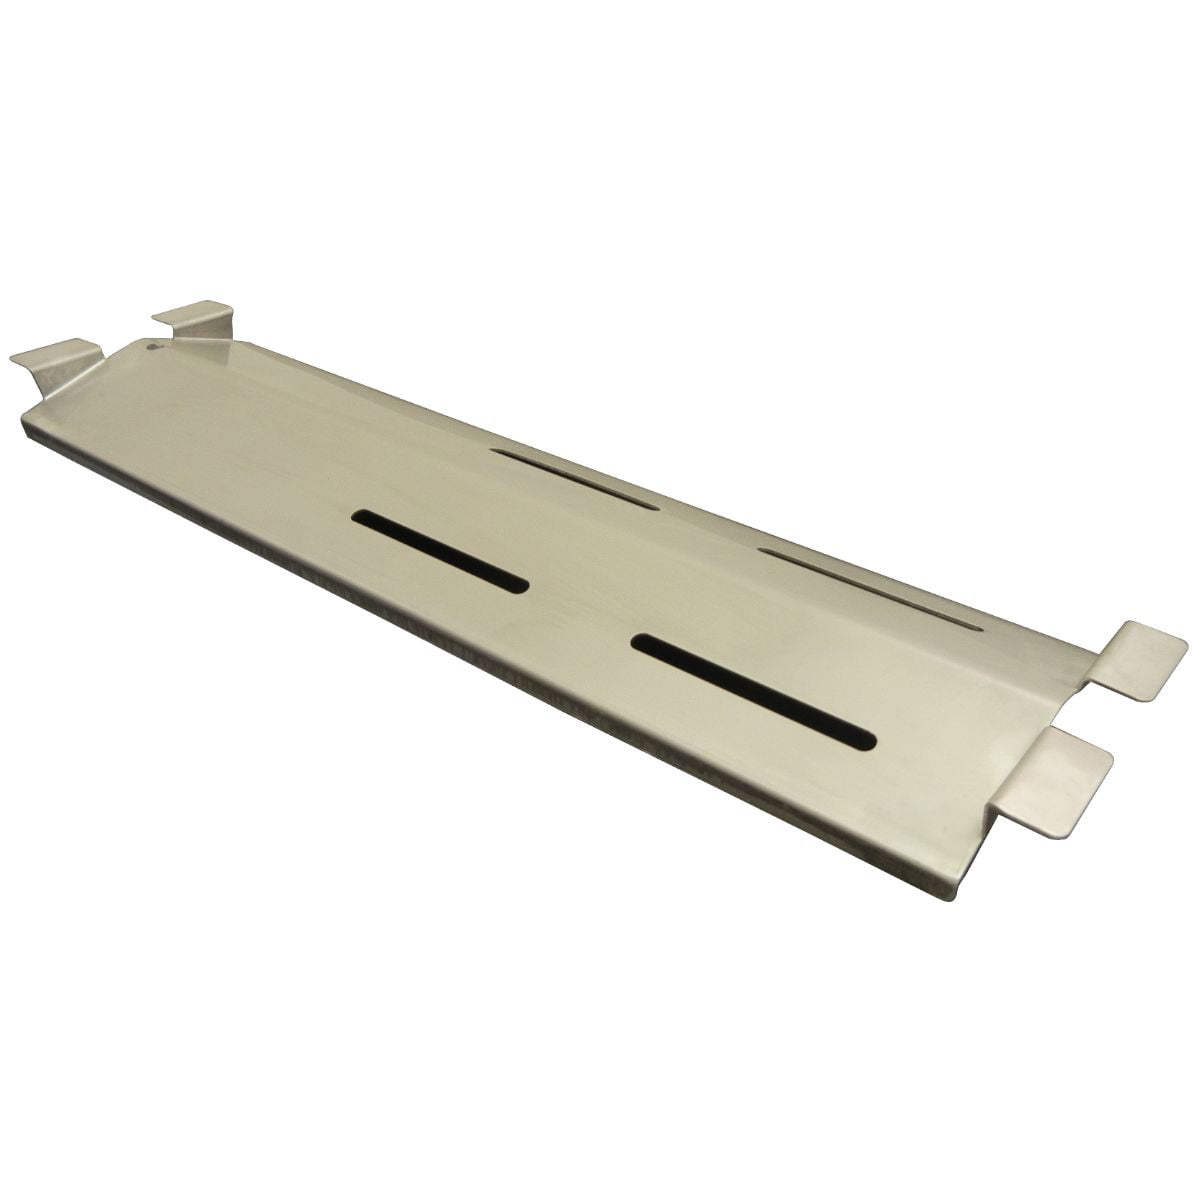 14.5" Stainless Steel Heat Plate for Grill Chef and Members Mark Gas Grills